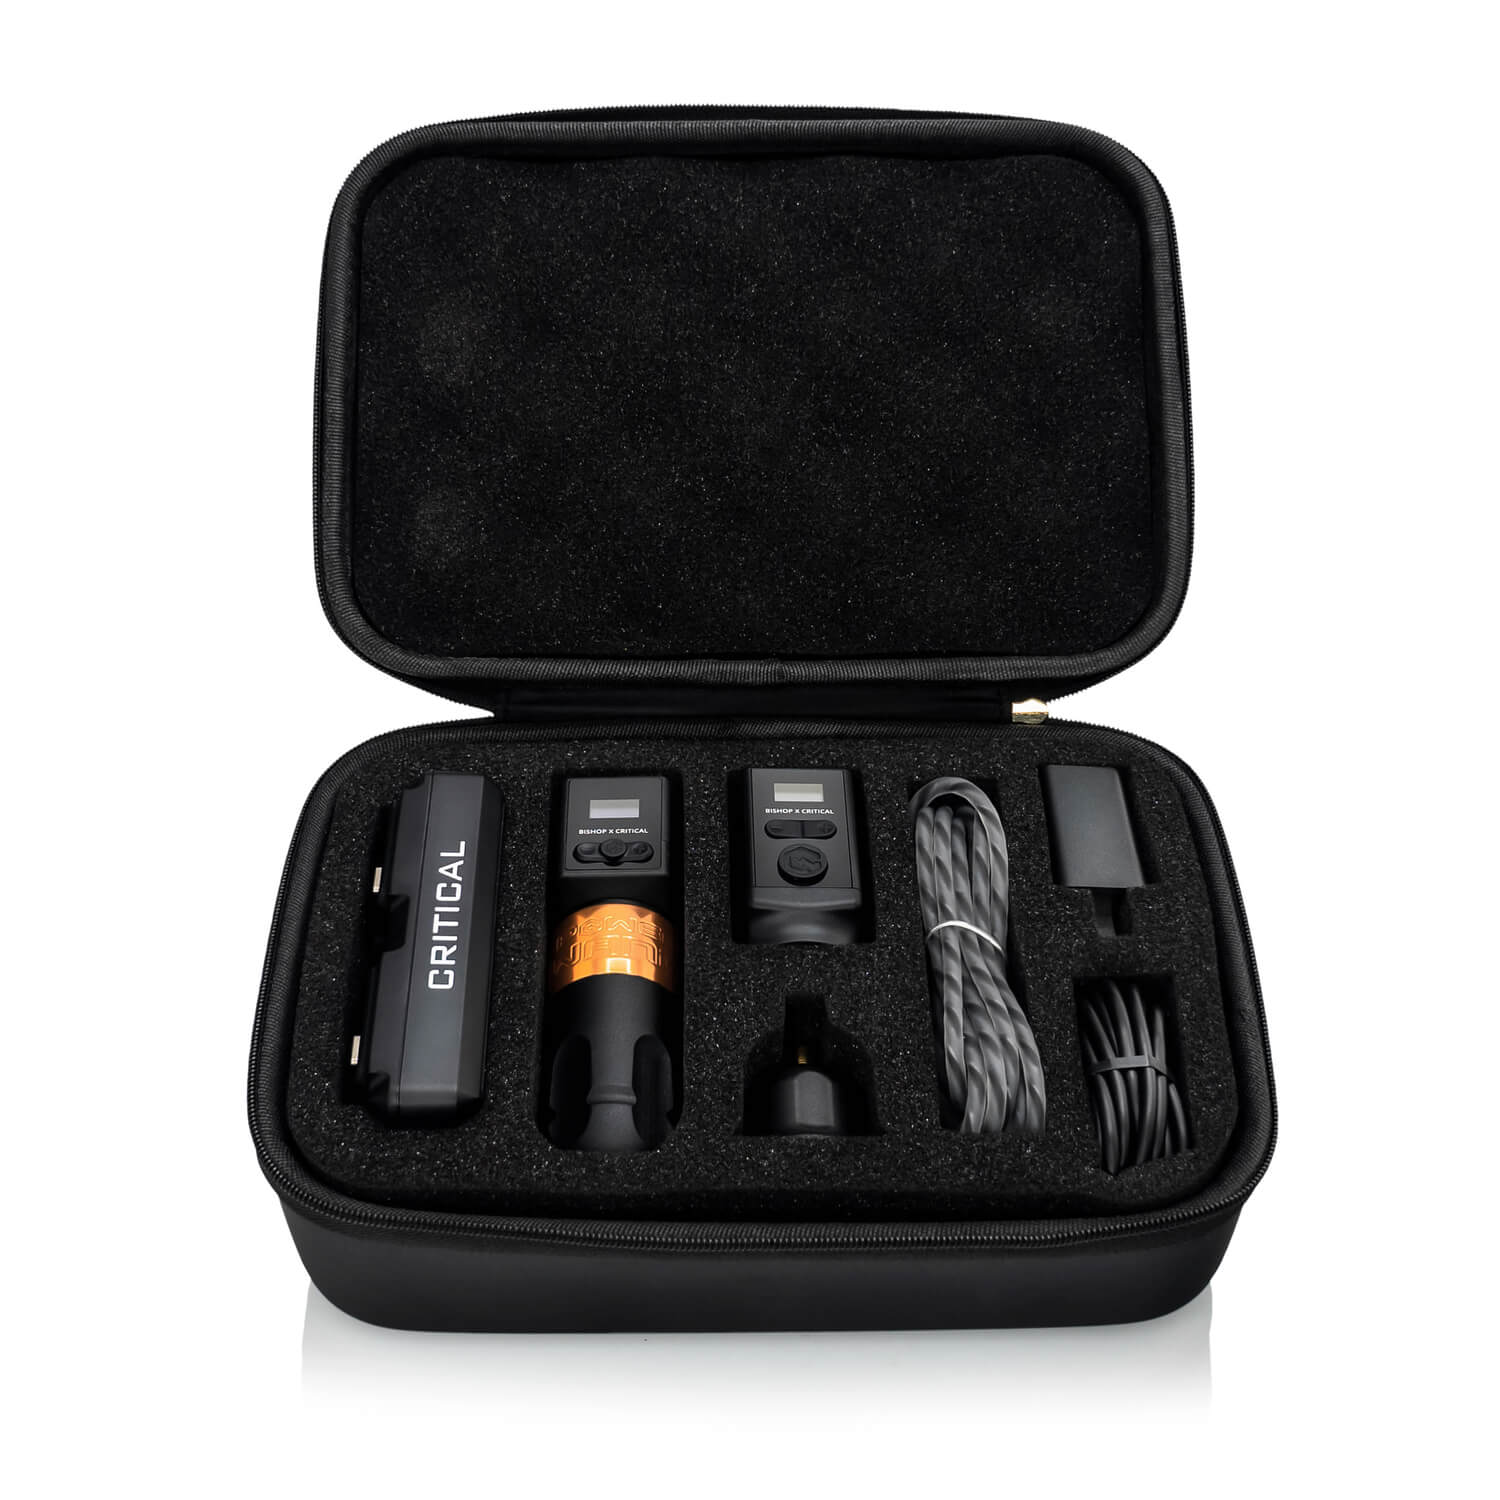 HUNTER Wireless Ink Tattoo Kit Professional Full Set With Mixing Cartridges  For Artistic Freedom 231204 From Bian04, $88.86 | DHgate.Com